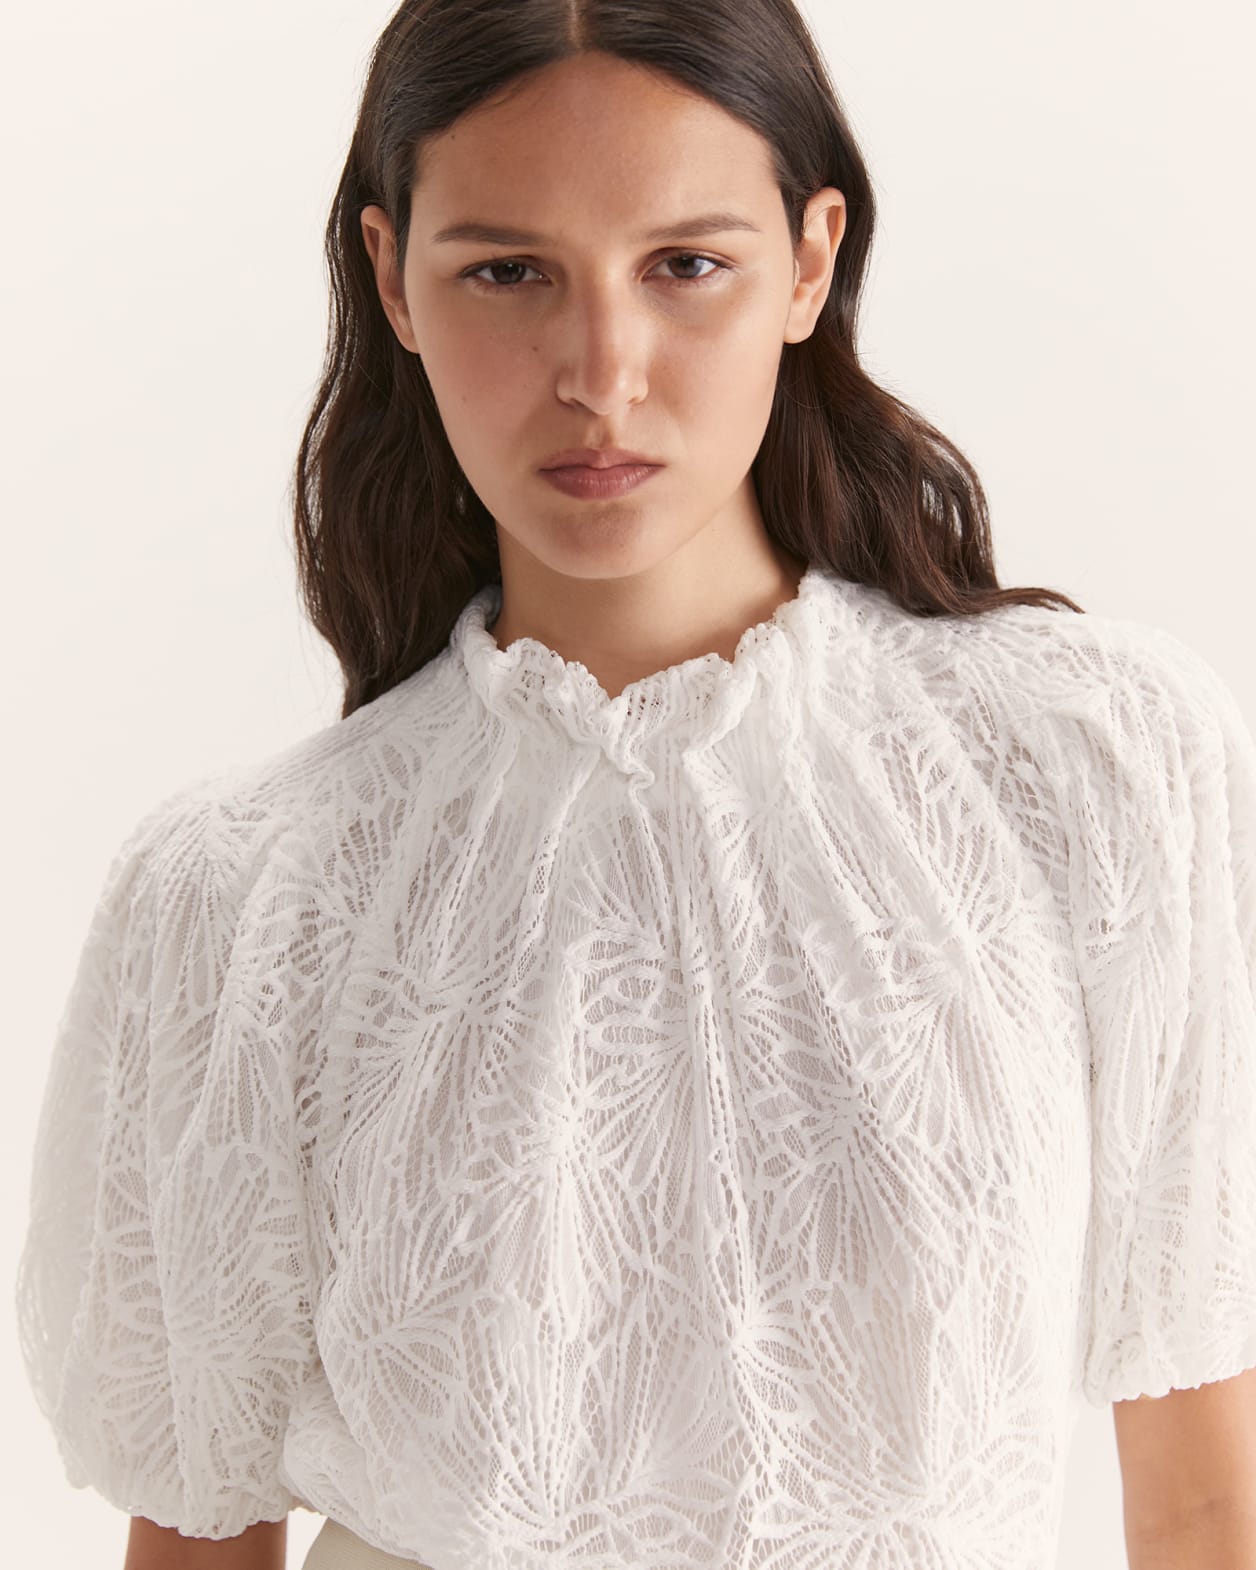 Elsa Lace Top in IVORY